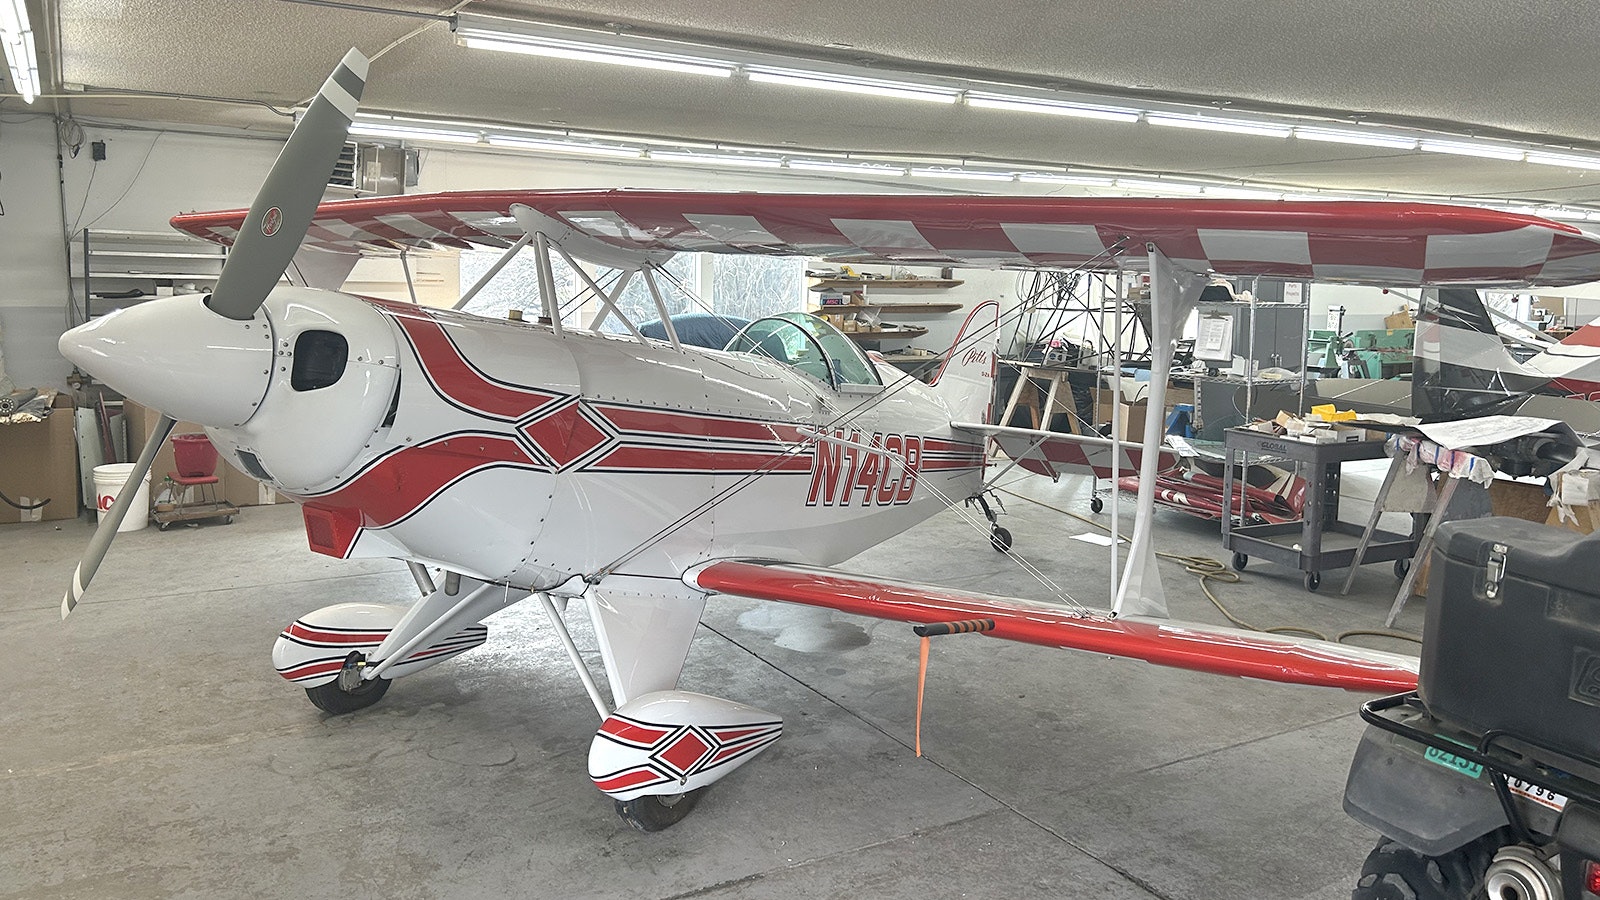 An Aviat Pitts Special that was recently refurbished at Aviat's facility in Afton, Wyoming.